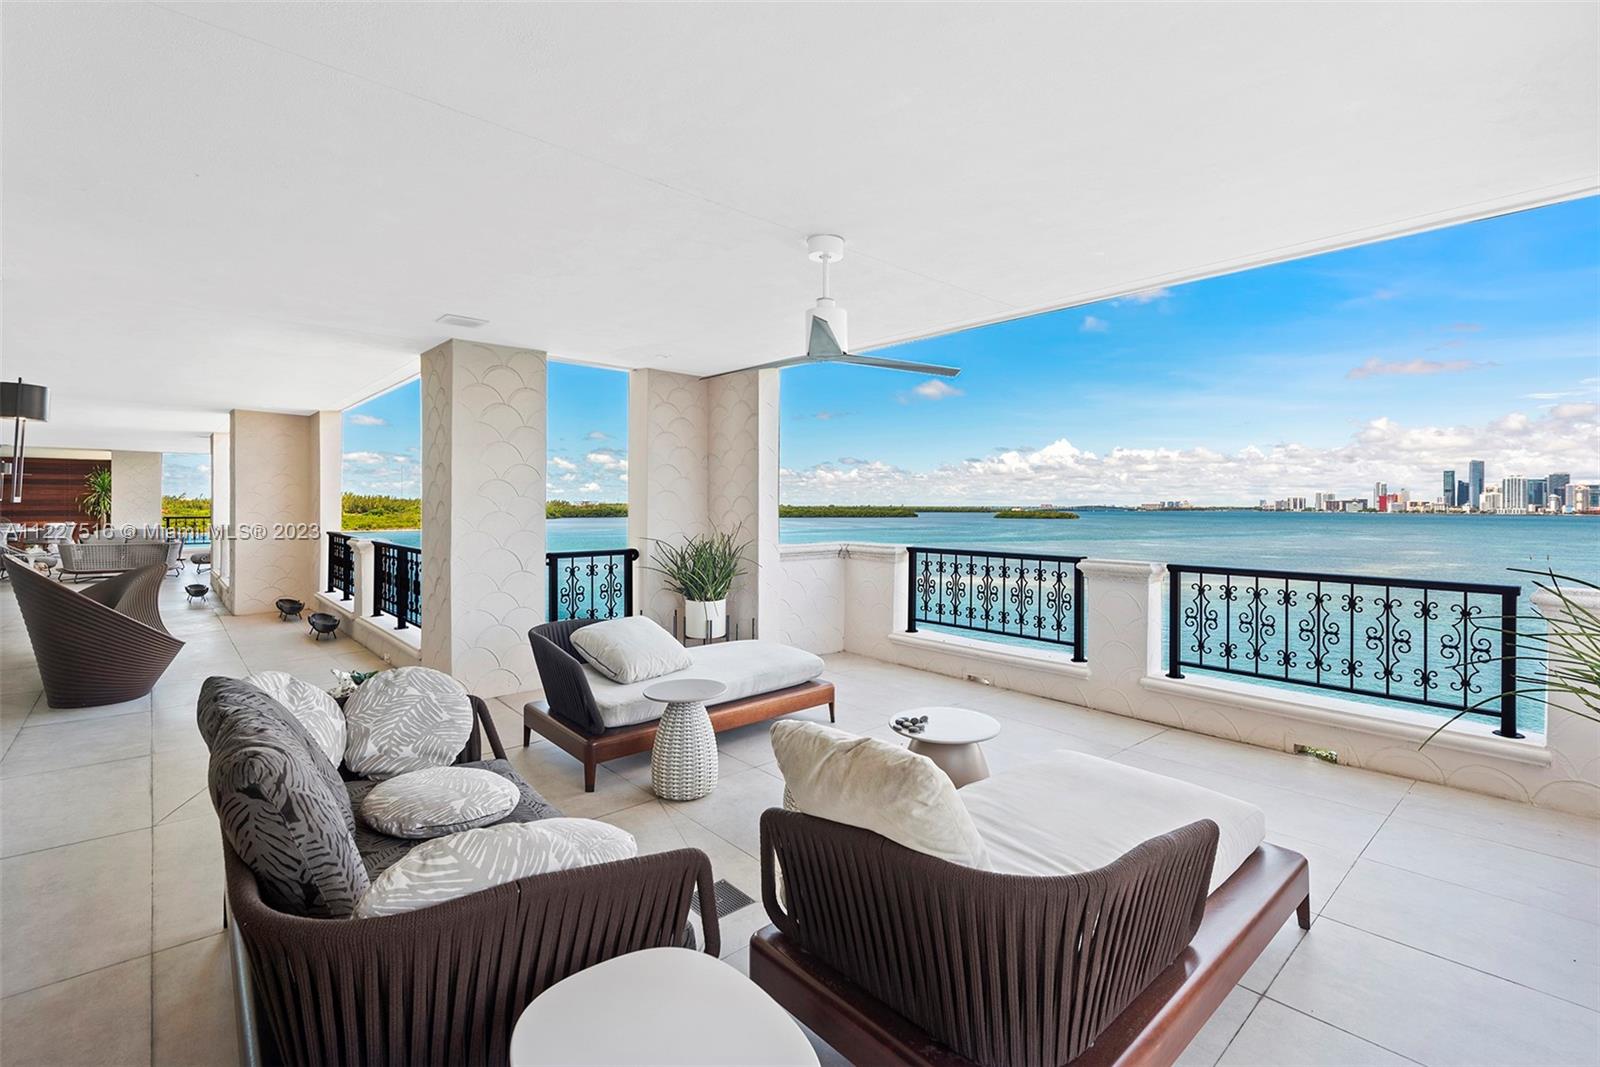 Listing Image 5373 Fisher Island Dr #5373